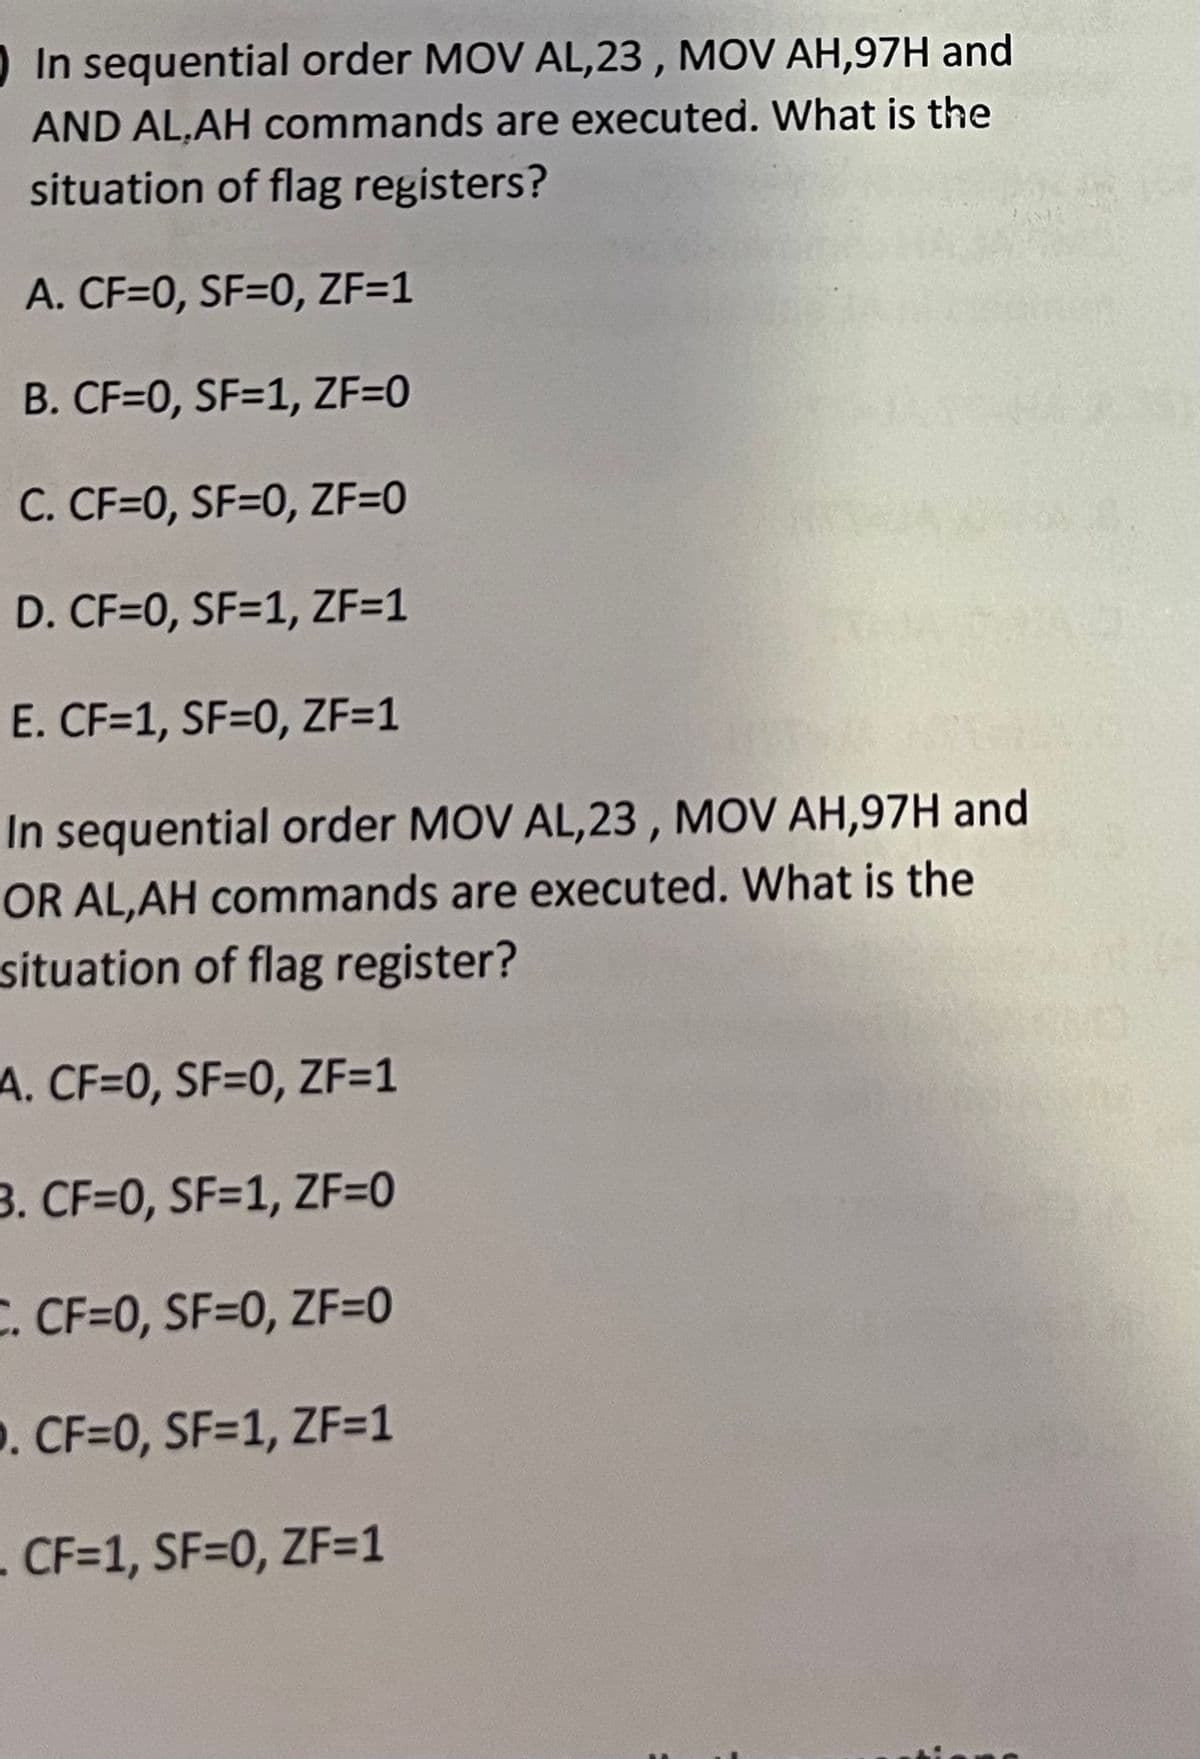 In sequential order MOV AL,23, MOV AH,97H and
AND AL,AH commands are executed. What is the
situation of flag registers?
A. CF=0, SF=0, ZF=1
B. CF=0, SF=1, ZF=0
C. CF=0, SF=0, ZF=0
D. CF=0, SF=1, ZF=1
E. CF=1, SF=0, ZF=1
In sequential order MOV AL,23, MOV AH,97H and
OR AL,AH commands are executed. What is the
situation of flag register?
A. CF=0, SF=0, ZF=1
3. CF=0, SF=1, ZF=0
C. CF=0, SF=0, ZF=0
D. CF=0, SF=1, ZF=1
- CF=1, SF=0, ZF=1